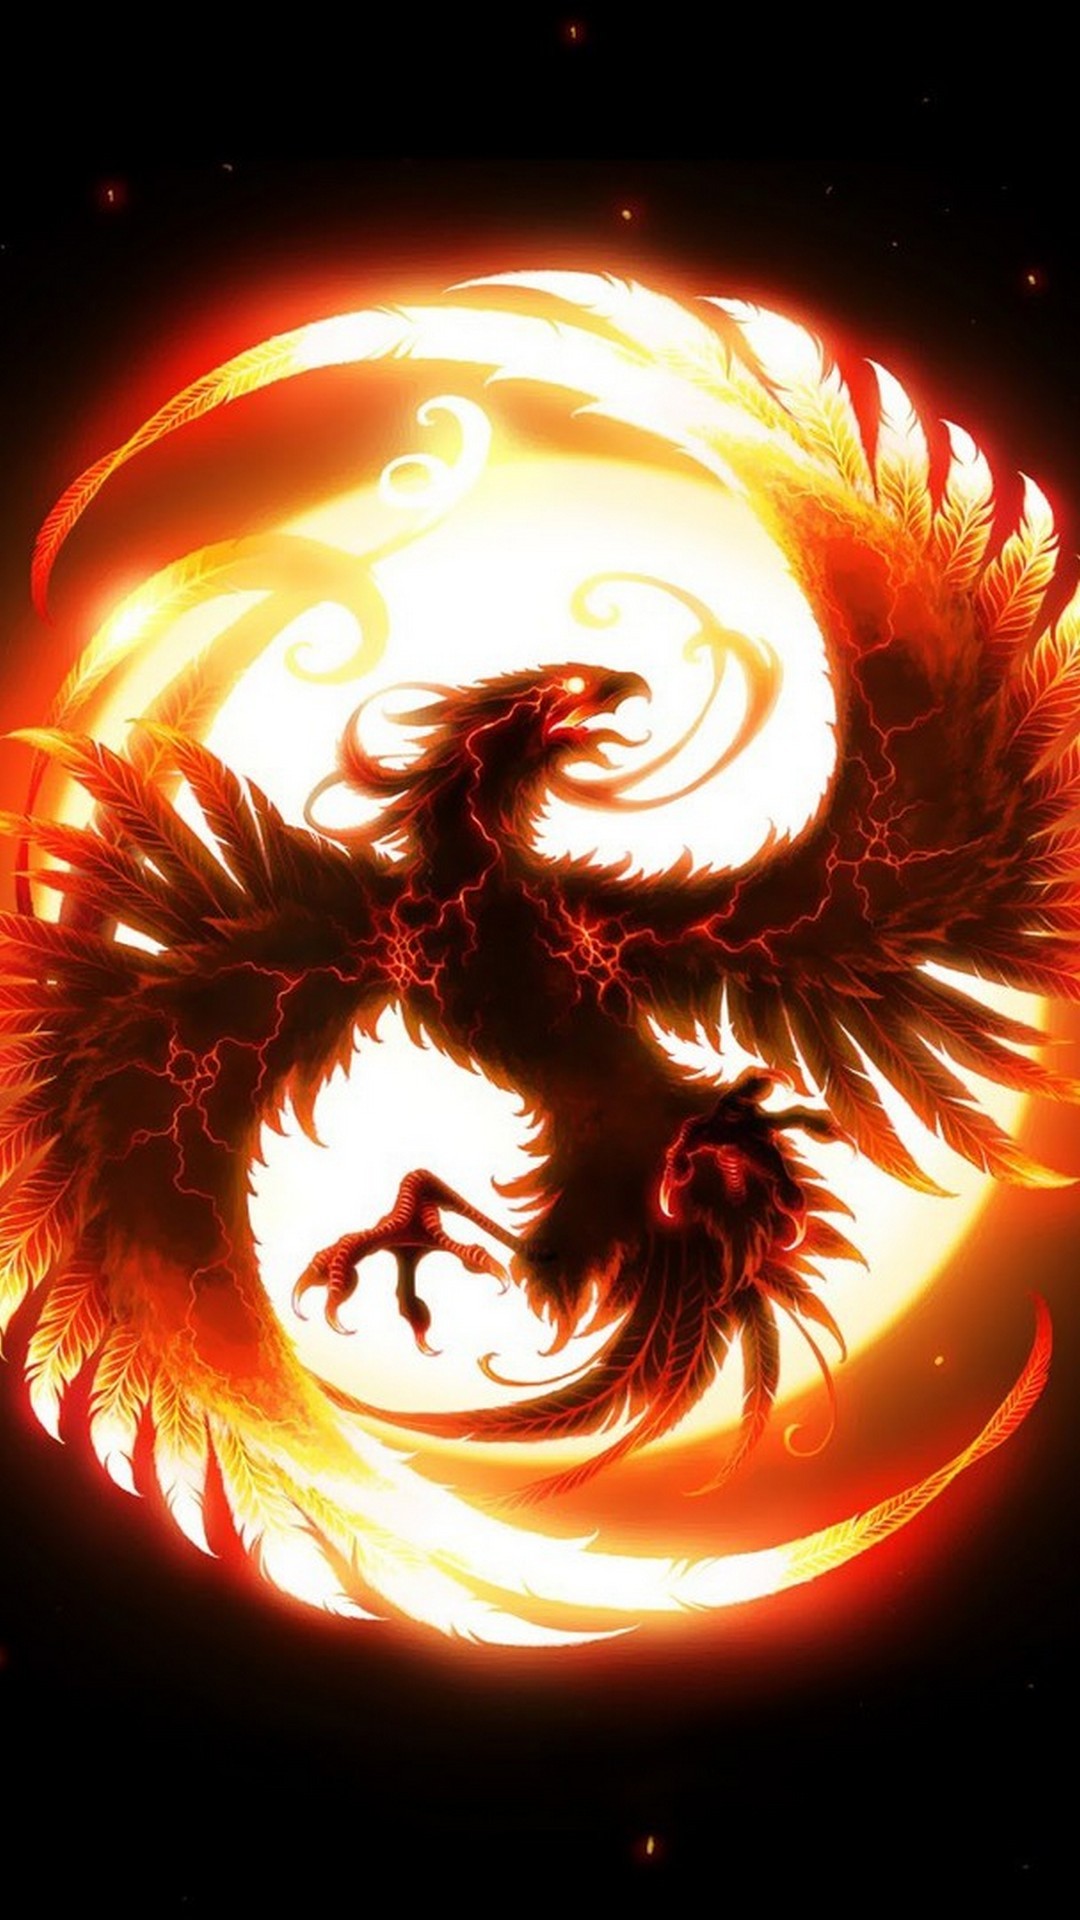 Android Wallpaper Phoenix with image resolution 1080x1920 pixel. You can make this wallpaper for your Android backgrounds, Tablet, Smartphones Screensavers and Mobile Phone Lock Screen